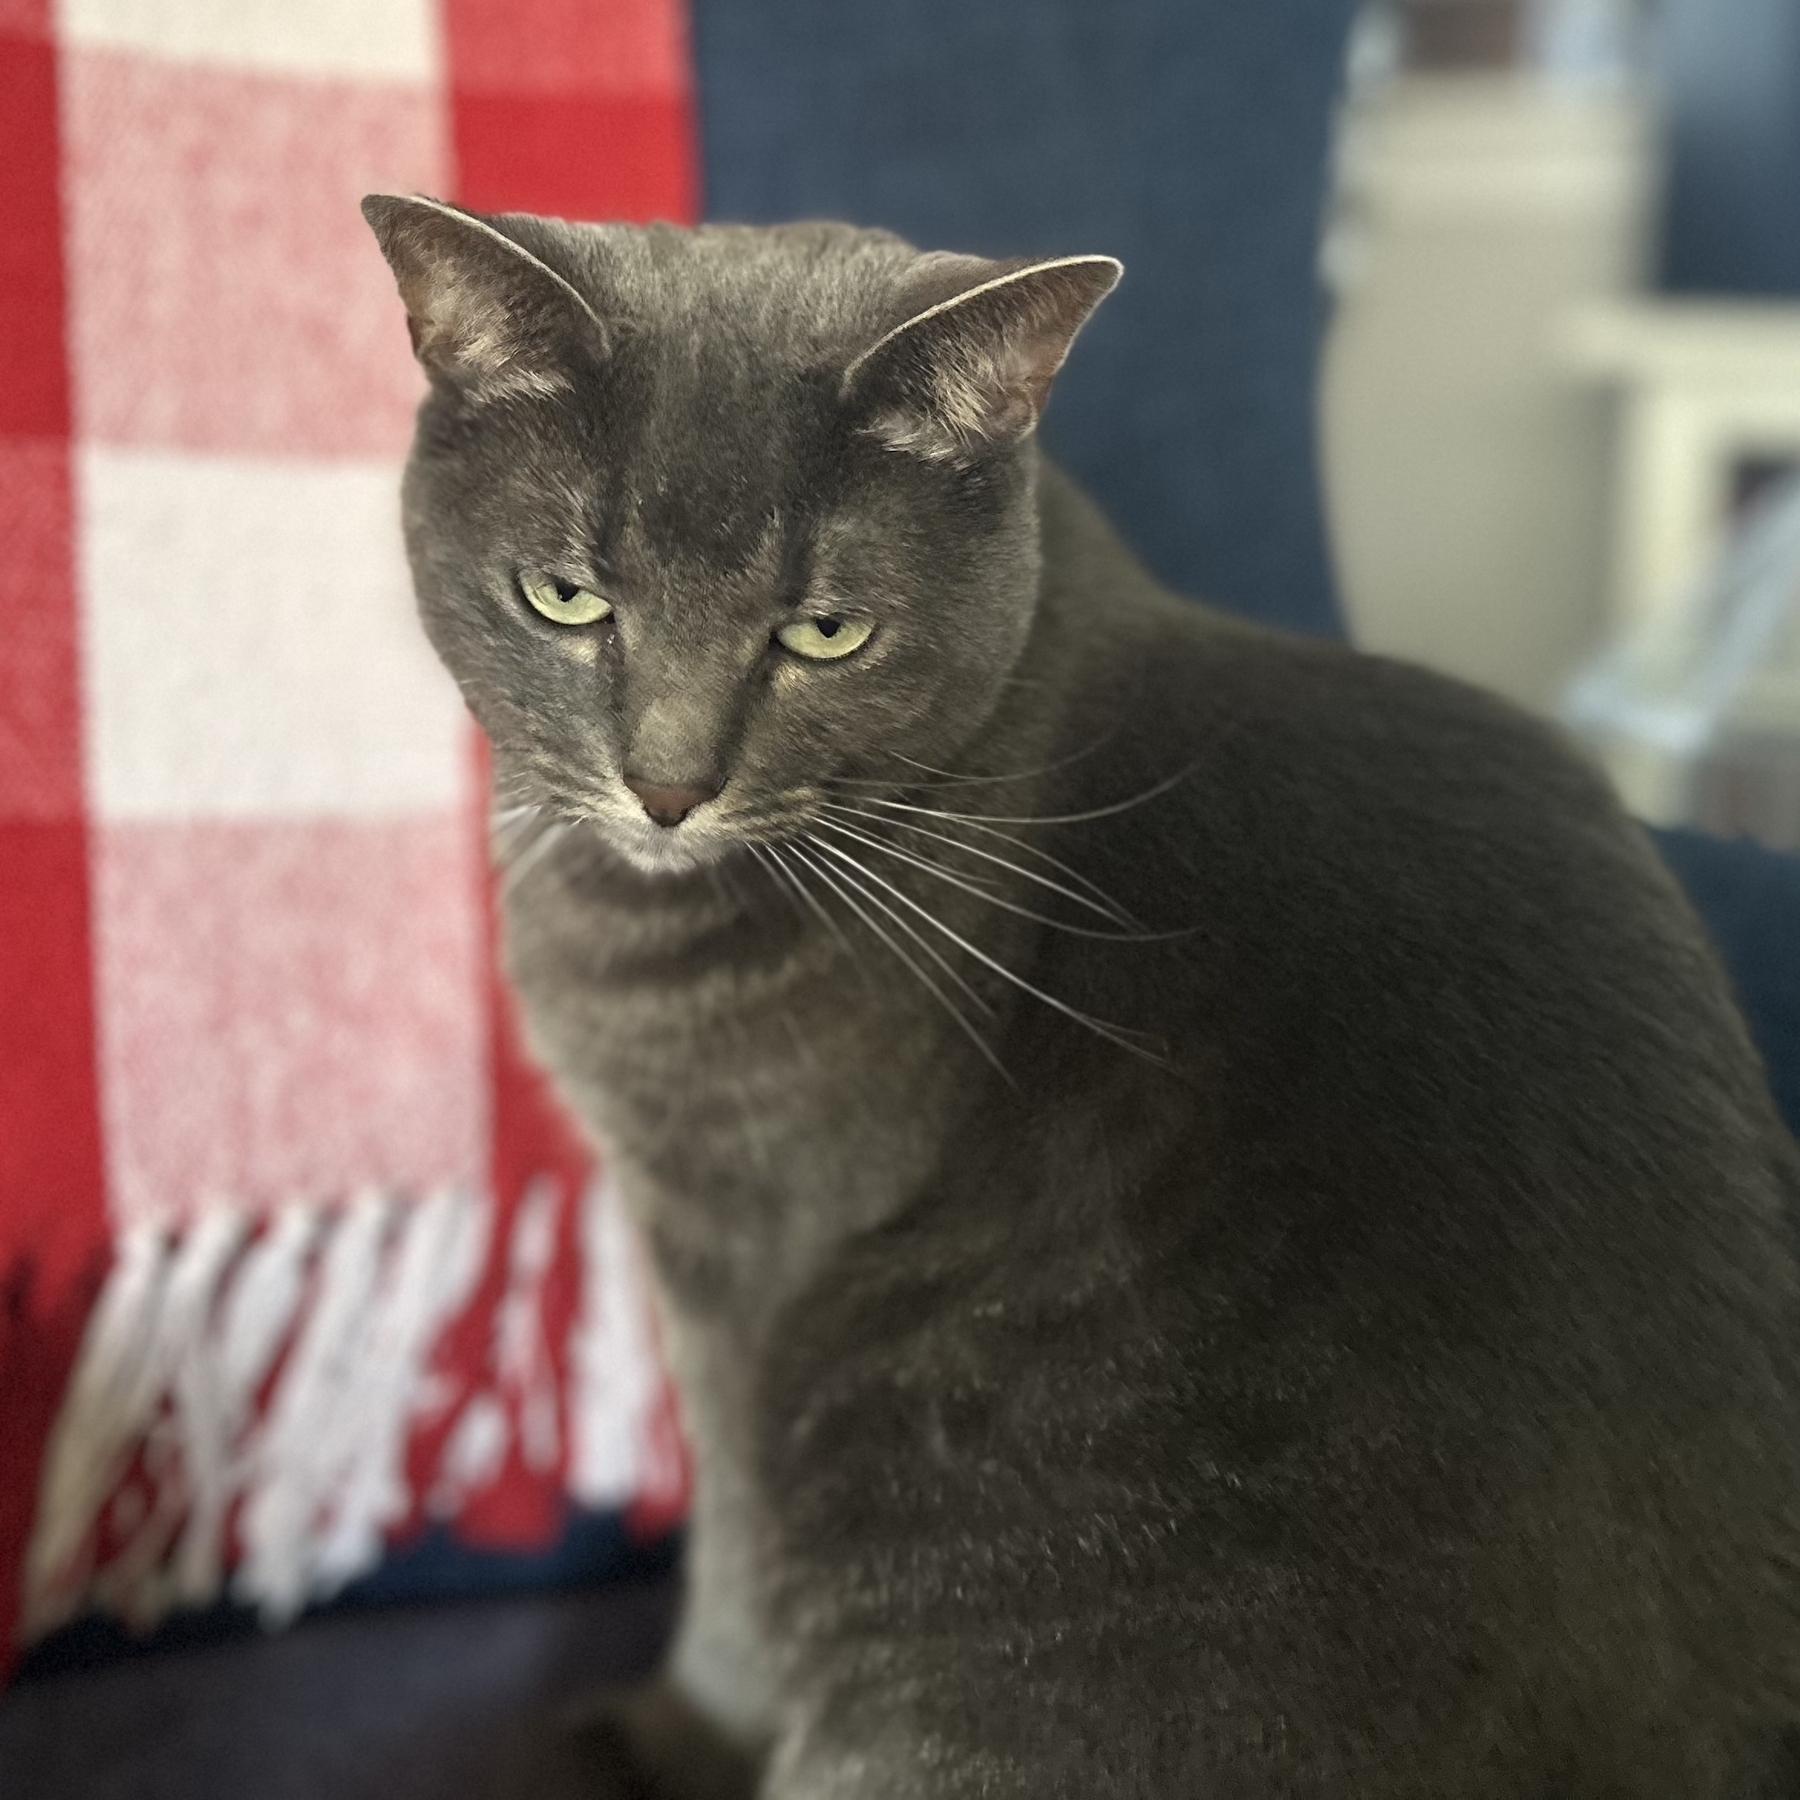 A gray cat sits in front of a red and white checkered blanket.